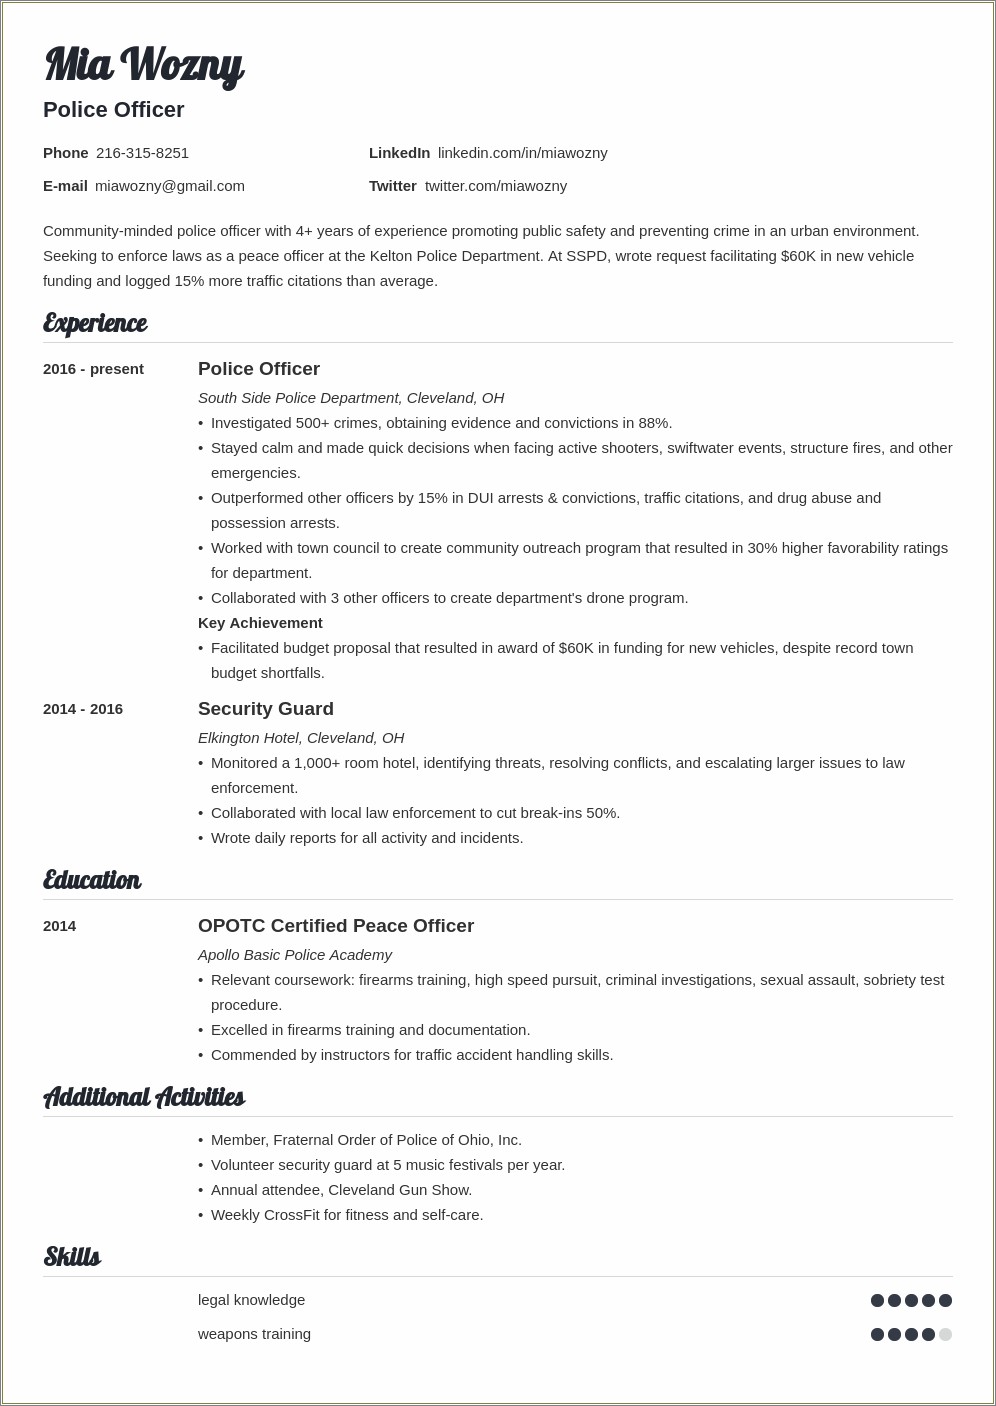 Resume Objective For Entry Level Police Officer